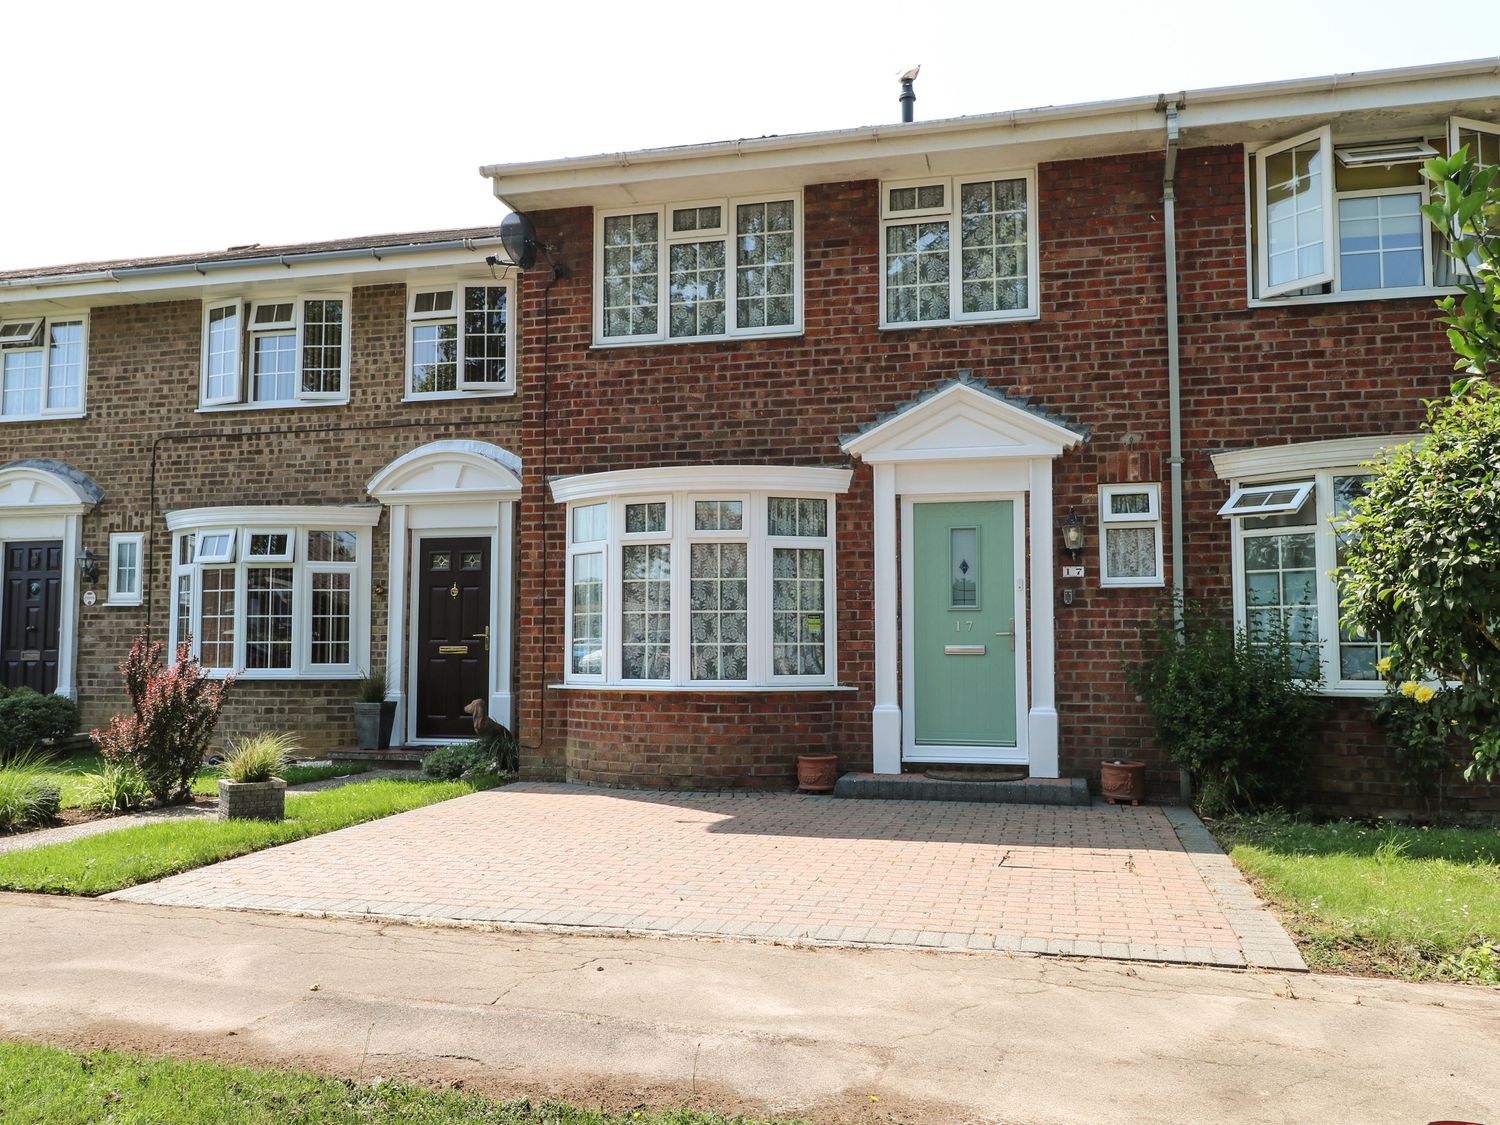 17 Coventry Close - Kent & Sussex - 989792 - photo 1